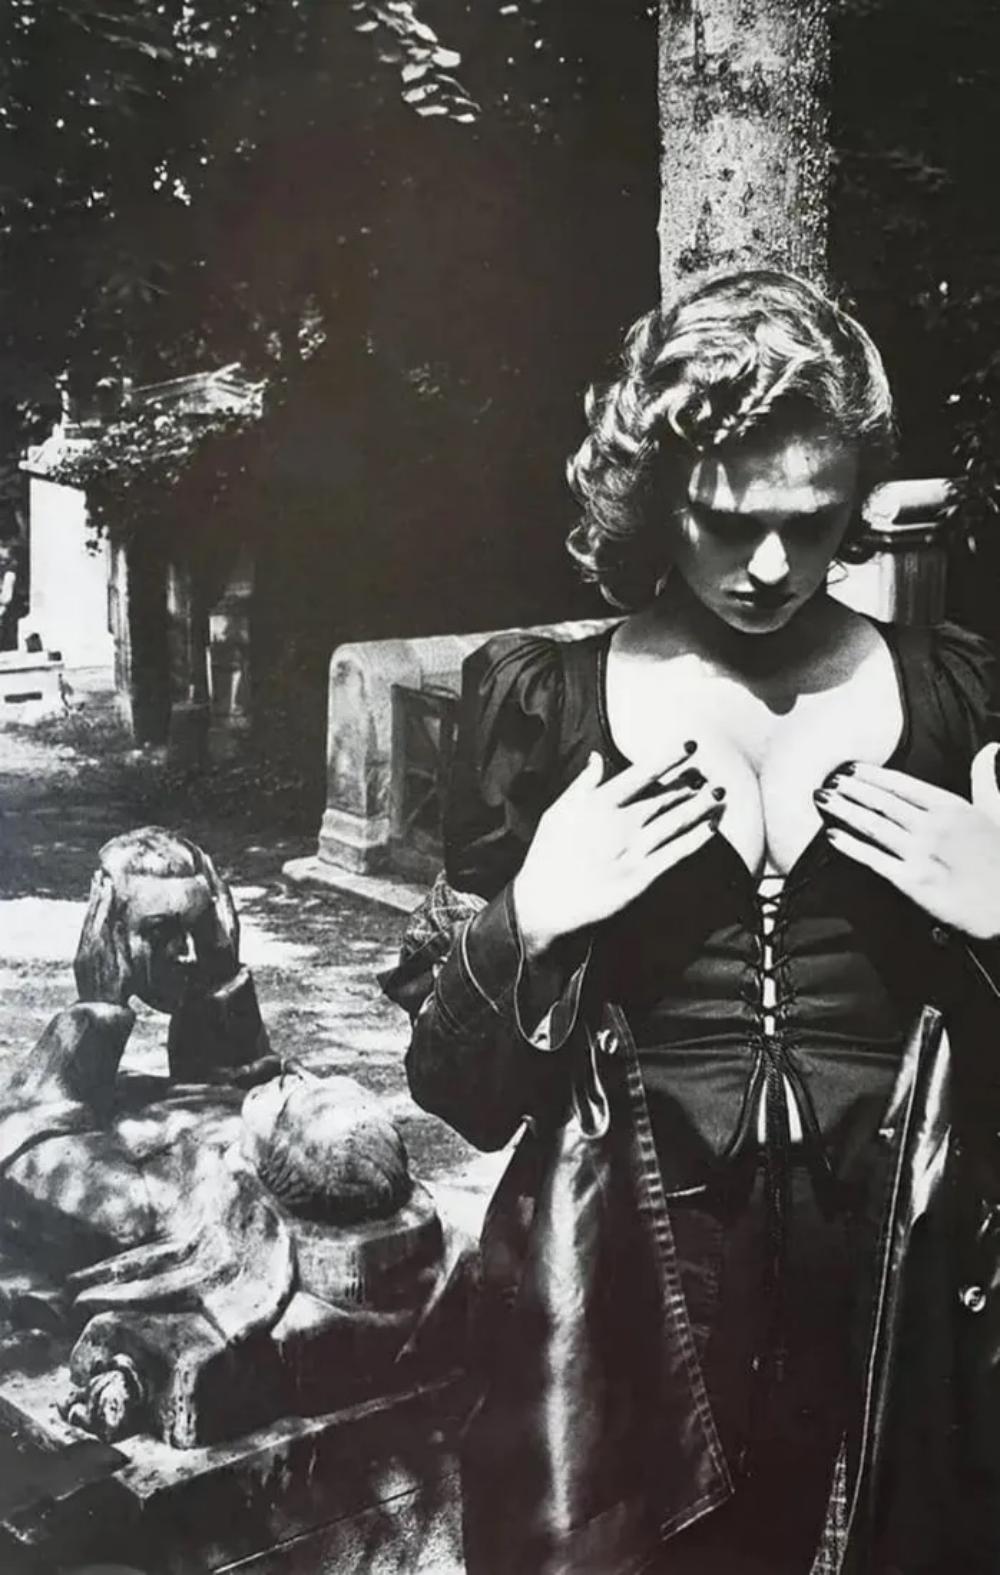 HELMUT NEWTON 'PERE LACHAISE TOMB OF TALMA 1977' HAND SIGNED - Photograph by Helmut Newton